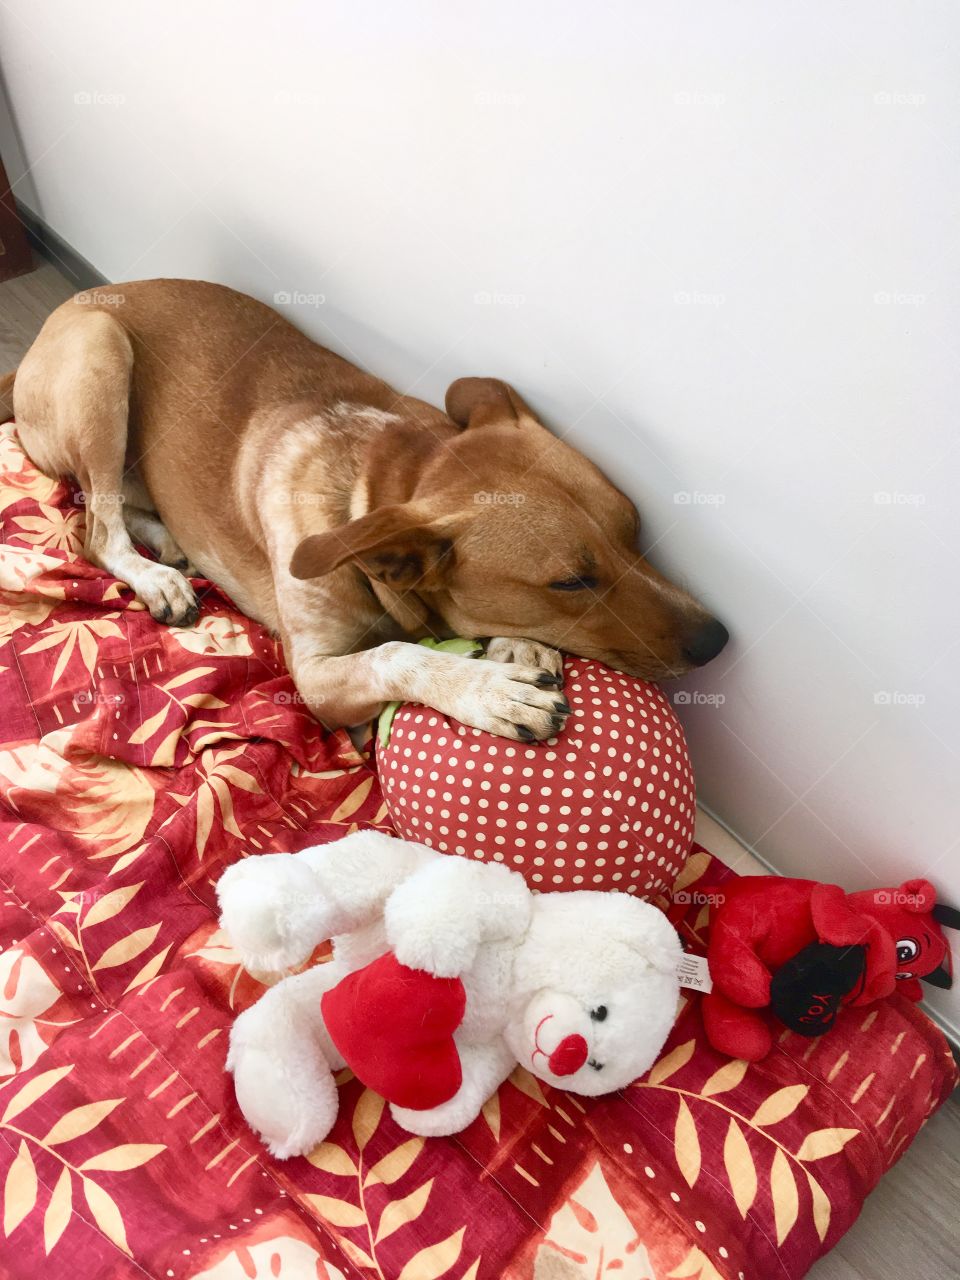 Adorable dog on his bed with his stuffed animals